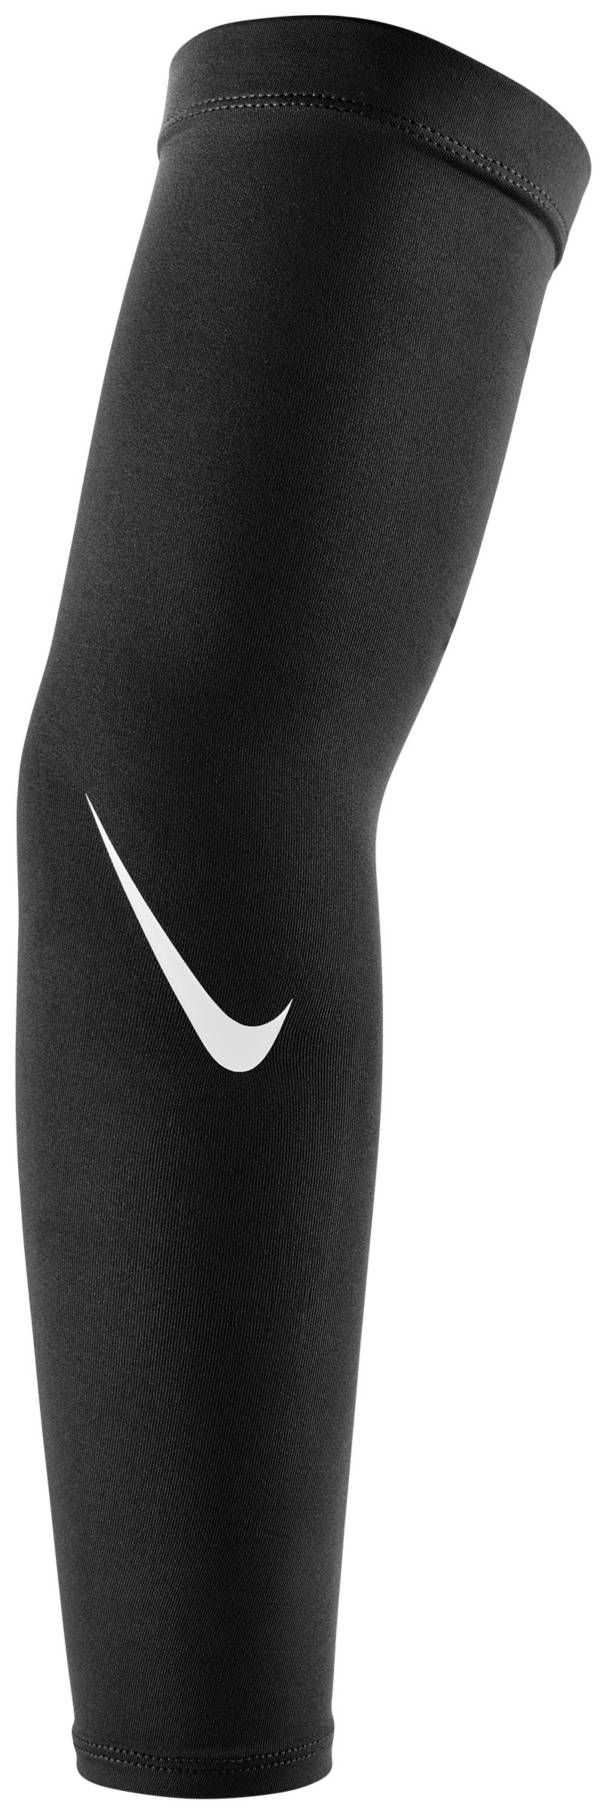 Nike Cooling Running Arm Sleeves Adult Unisex L/XL Black/Barely  Green/Silver for sale online